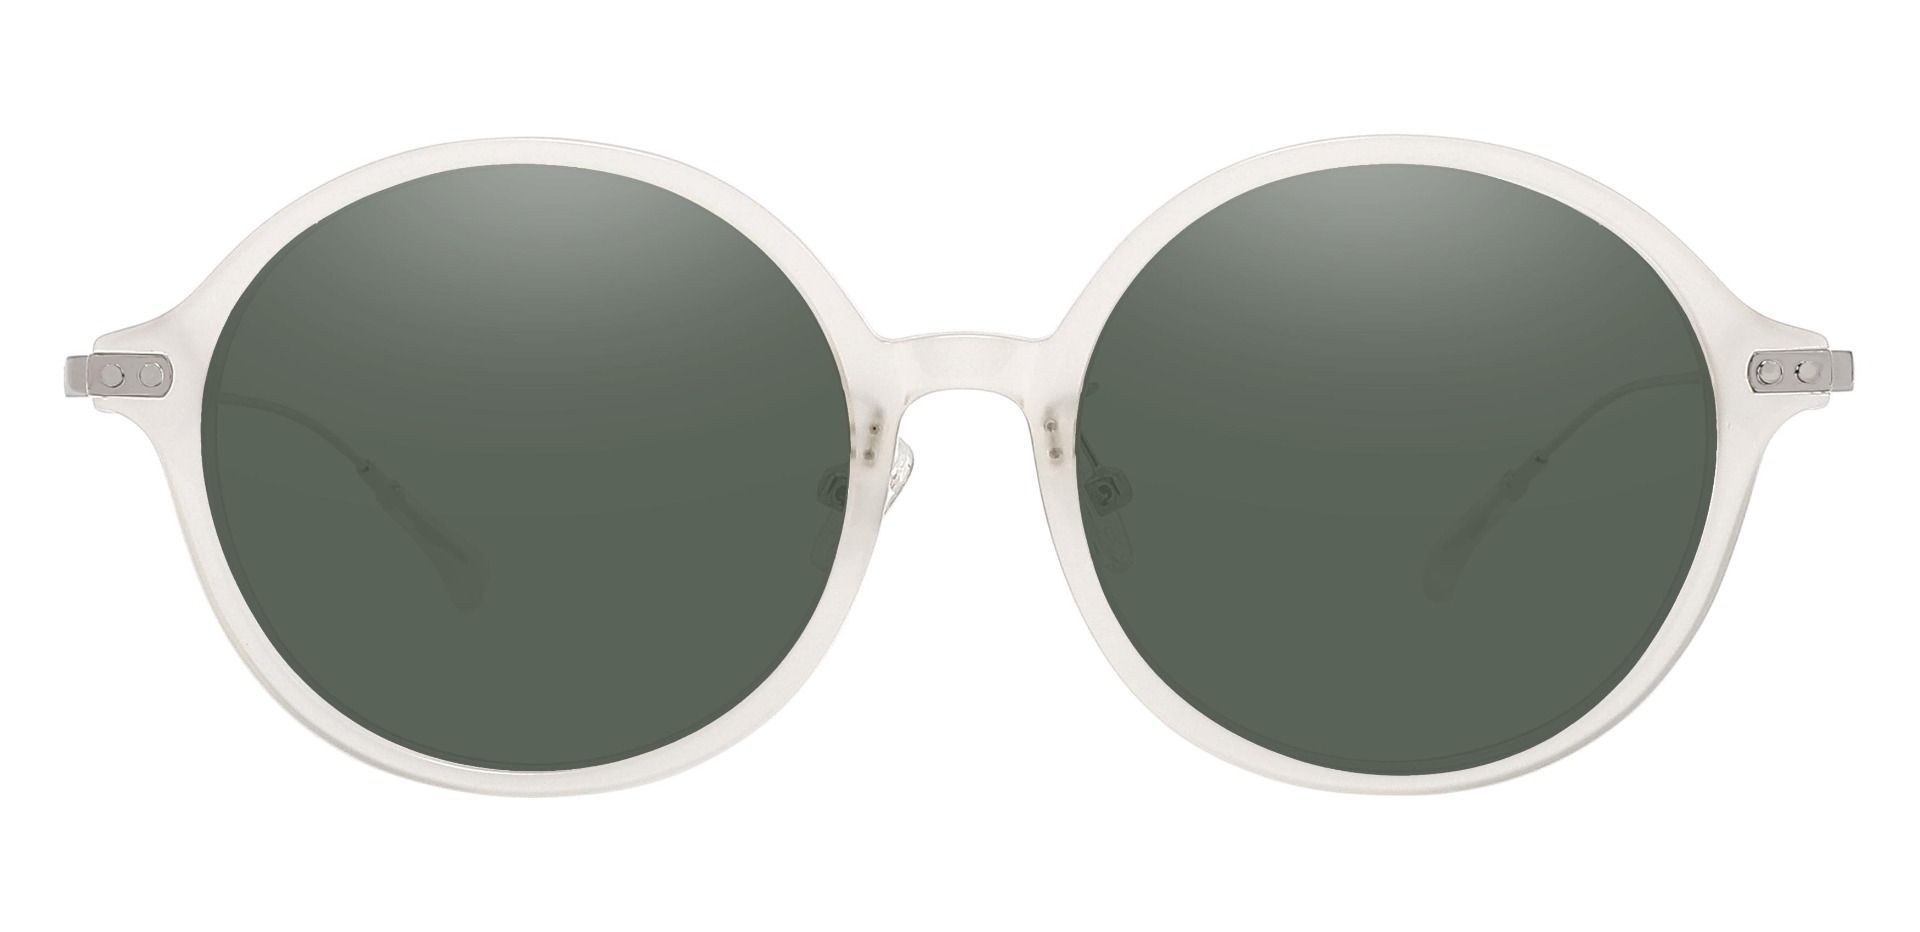 Princeton Round Non-Rx Sunglasses - Clear Frame With Green Lenses